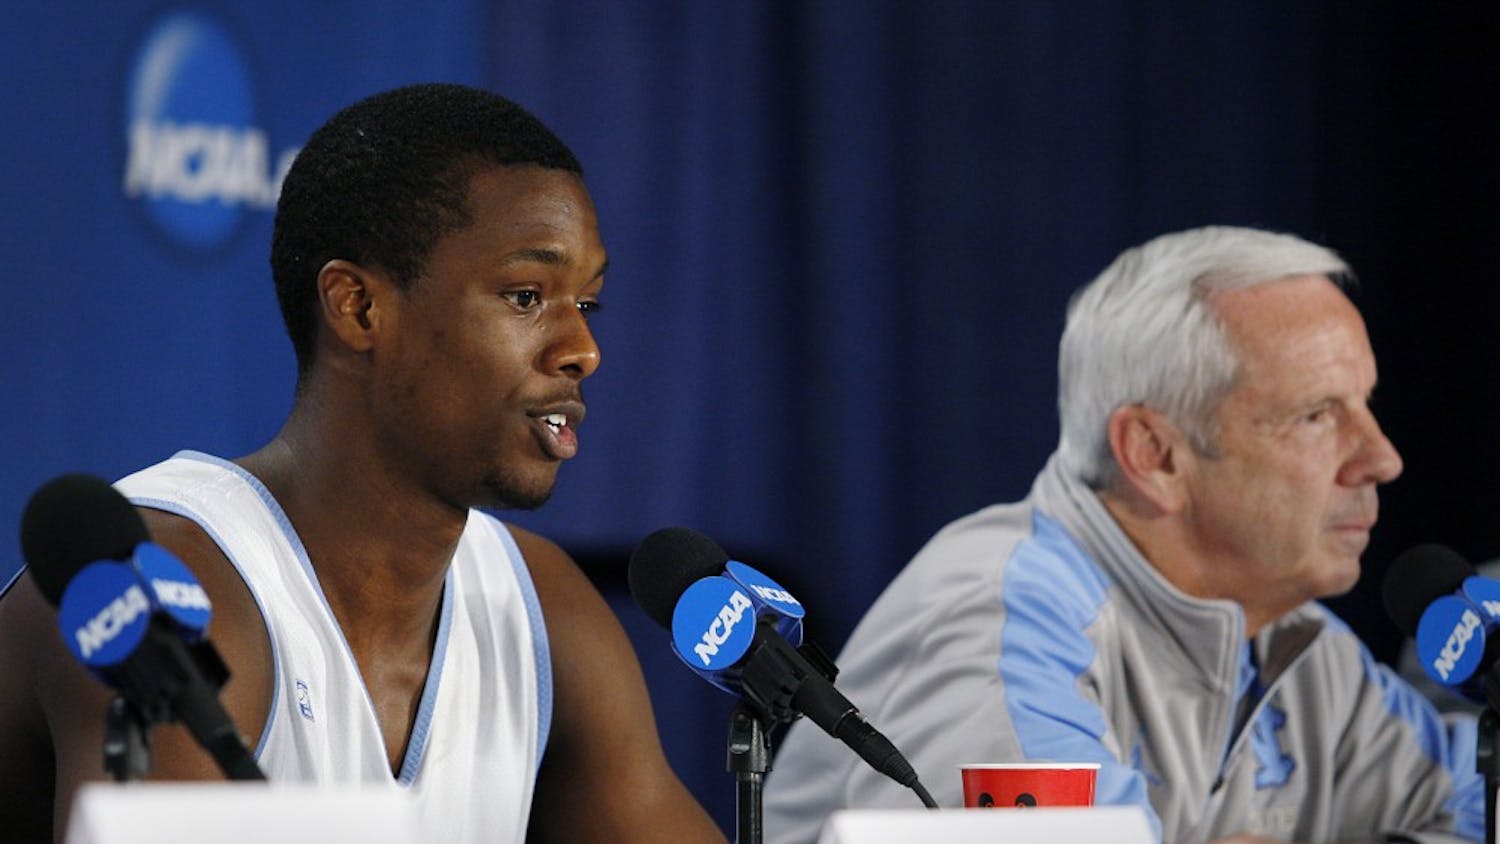 UNC forward Harrison Barnes answers a question during a press conference Saturday. UNC will take on Kansas in the Elite 8 round of the NCAA Tournament on Sunday at the Edward Jones Dome in St. Louis. 